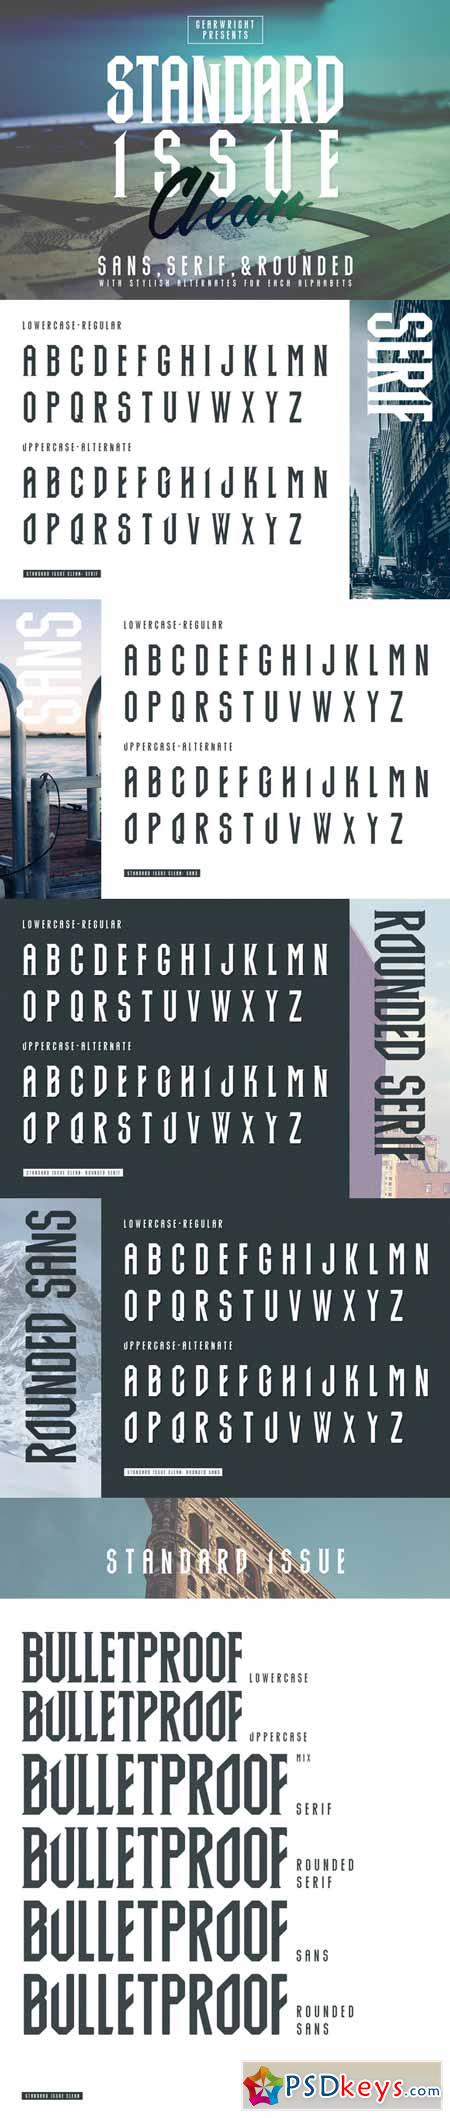 Standard Issue Clean Typeface 389764